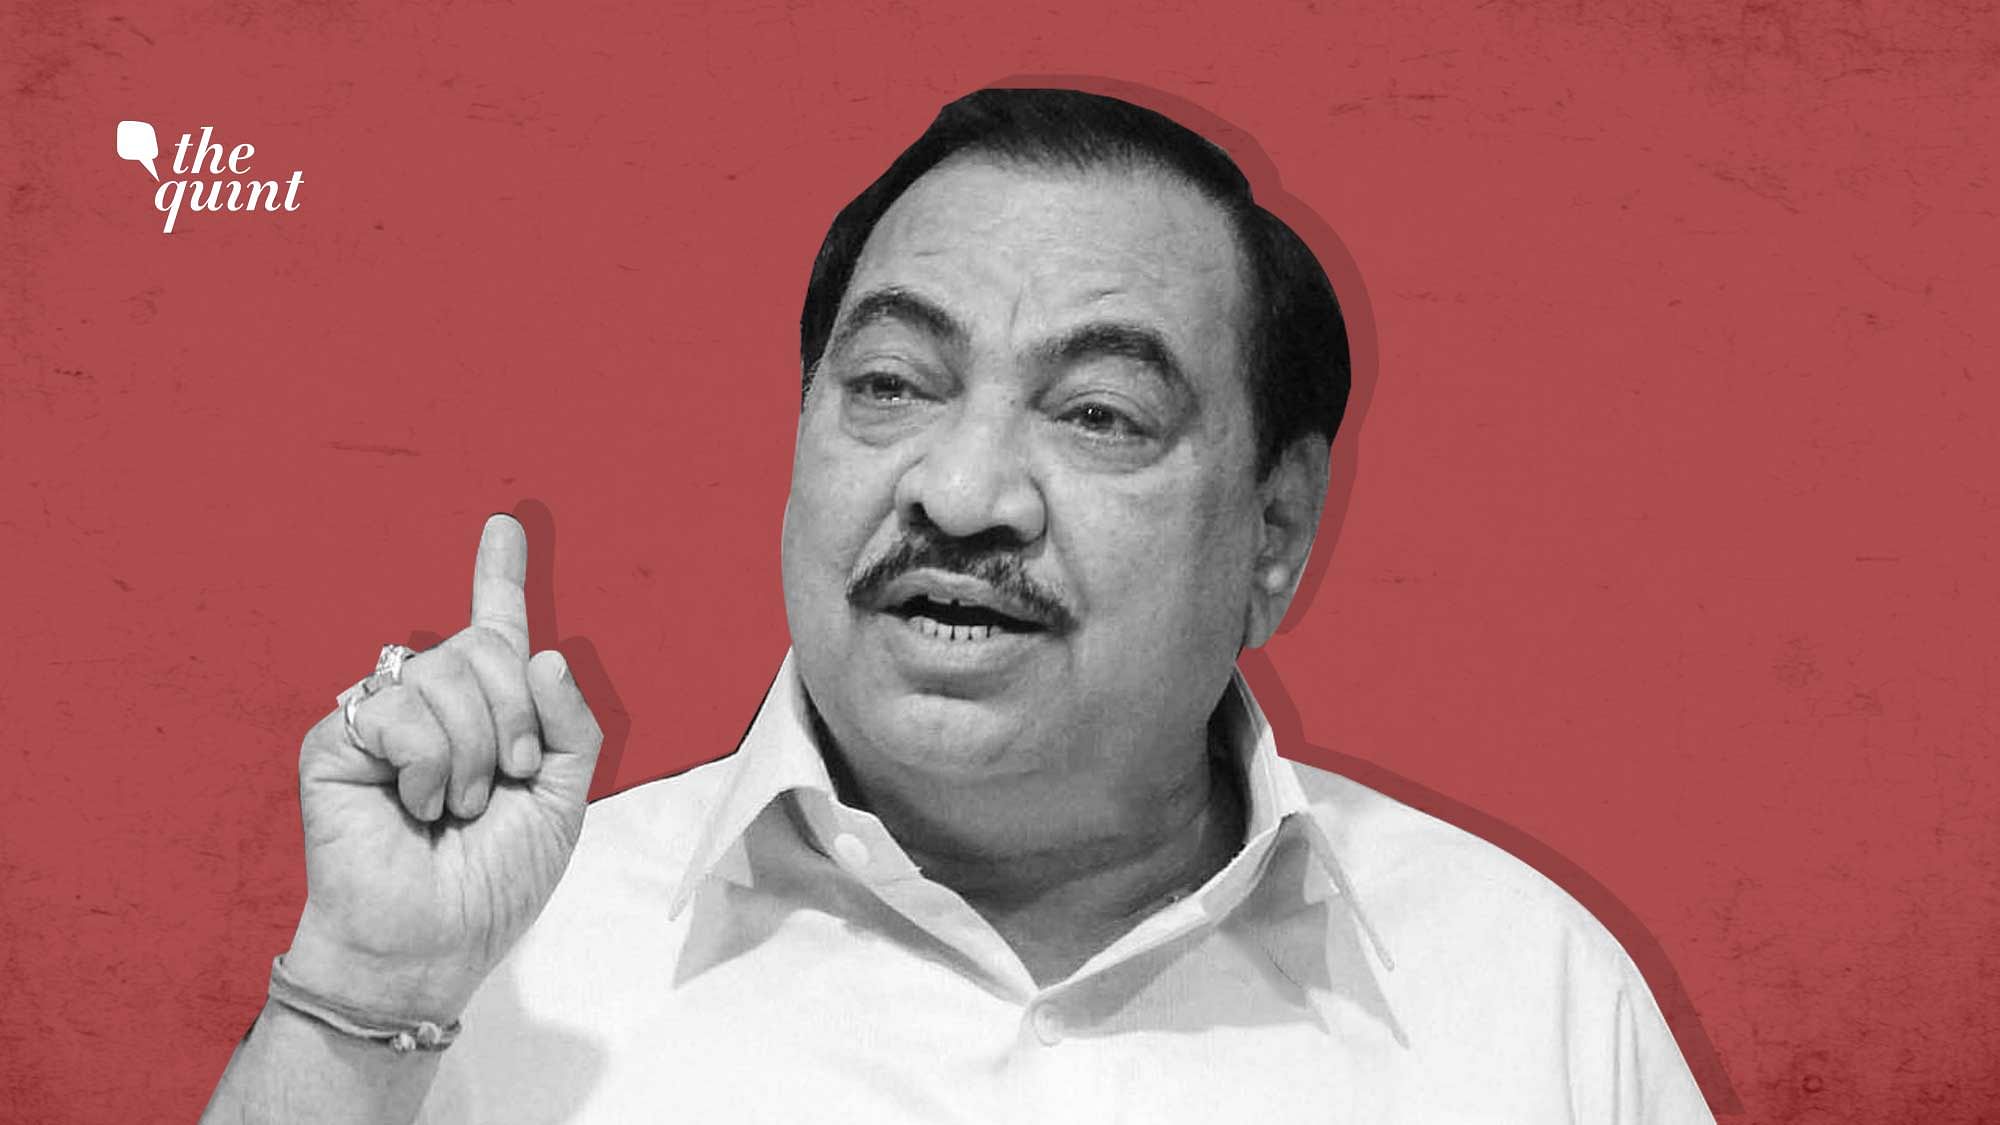 Former Maharashtra minister Eknath Khadse, who recently tendered his resignation from the BJP to join the NCP said that his party rendered him useless after he put in 35 years of hard work in the state.